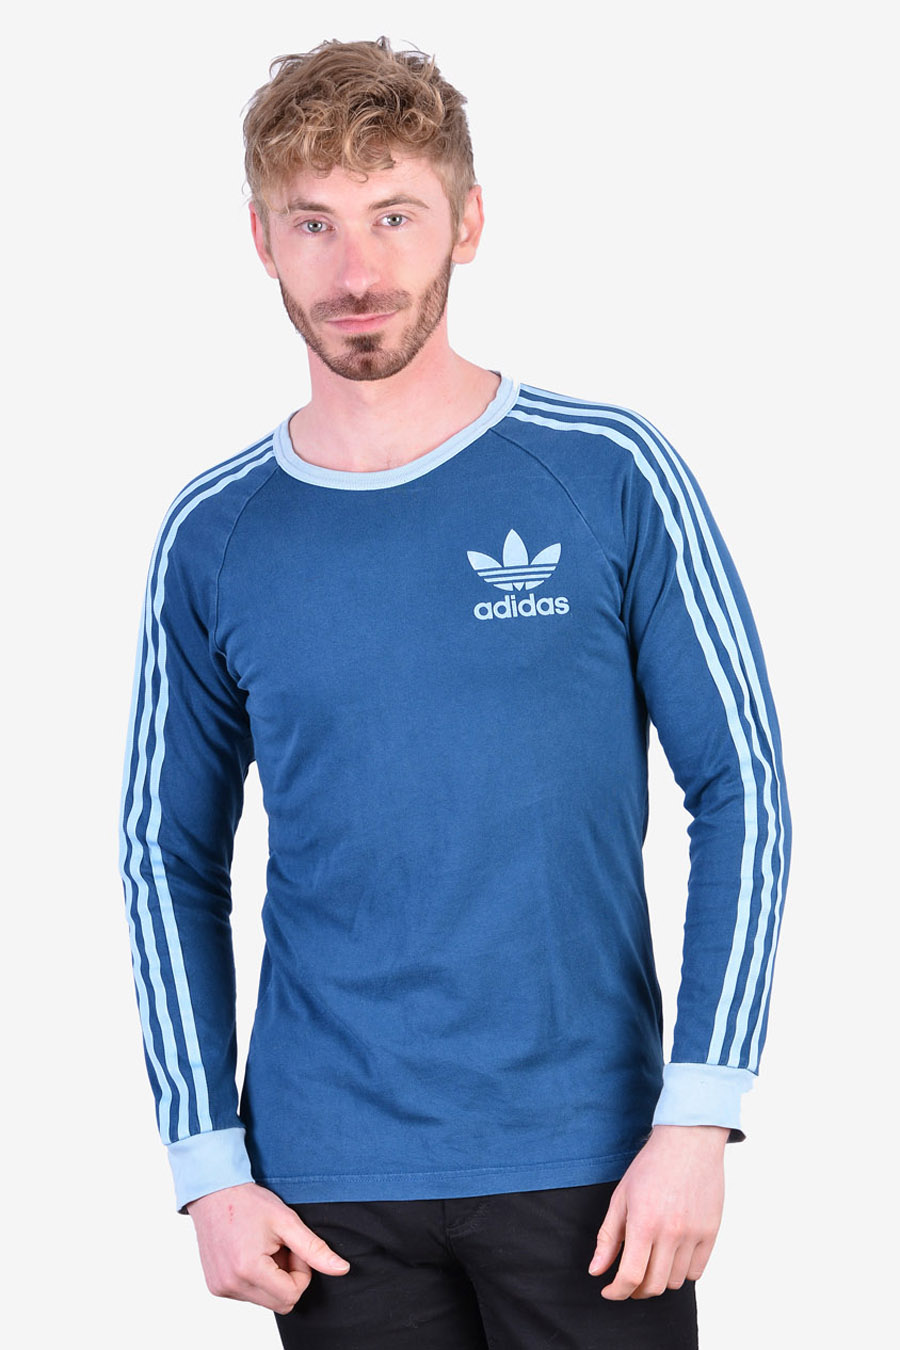 adidas Training Motion long sleeve top with 1/4 zip in dusty blue